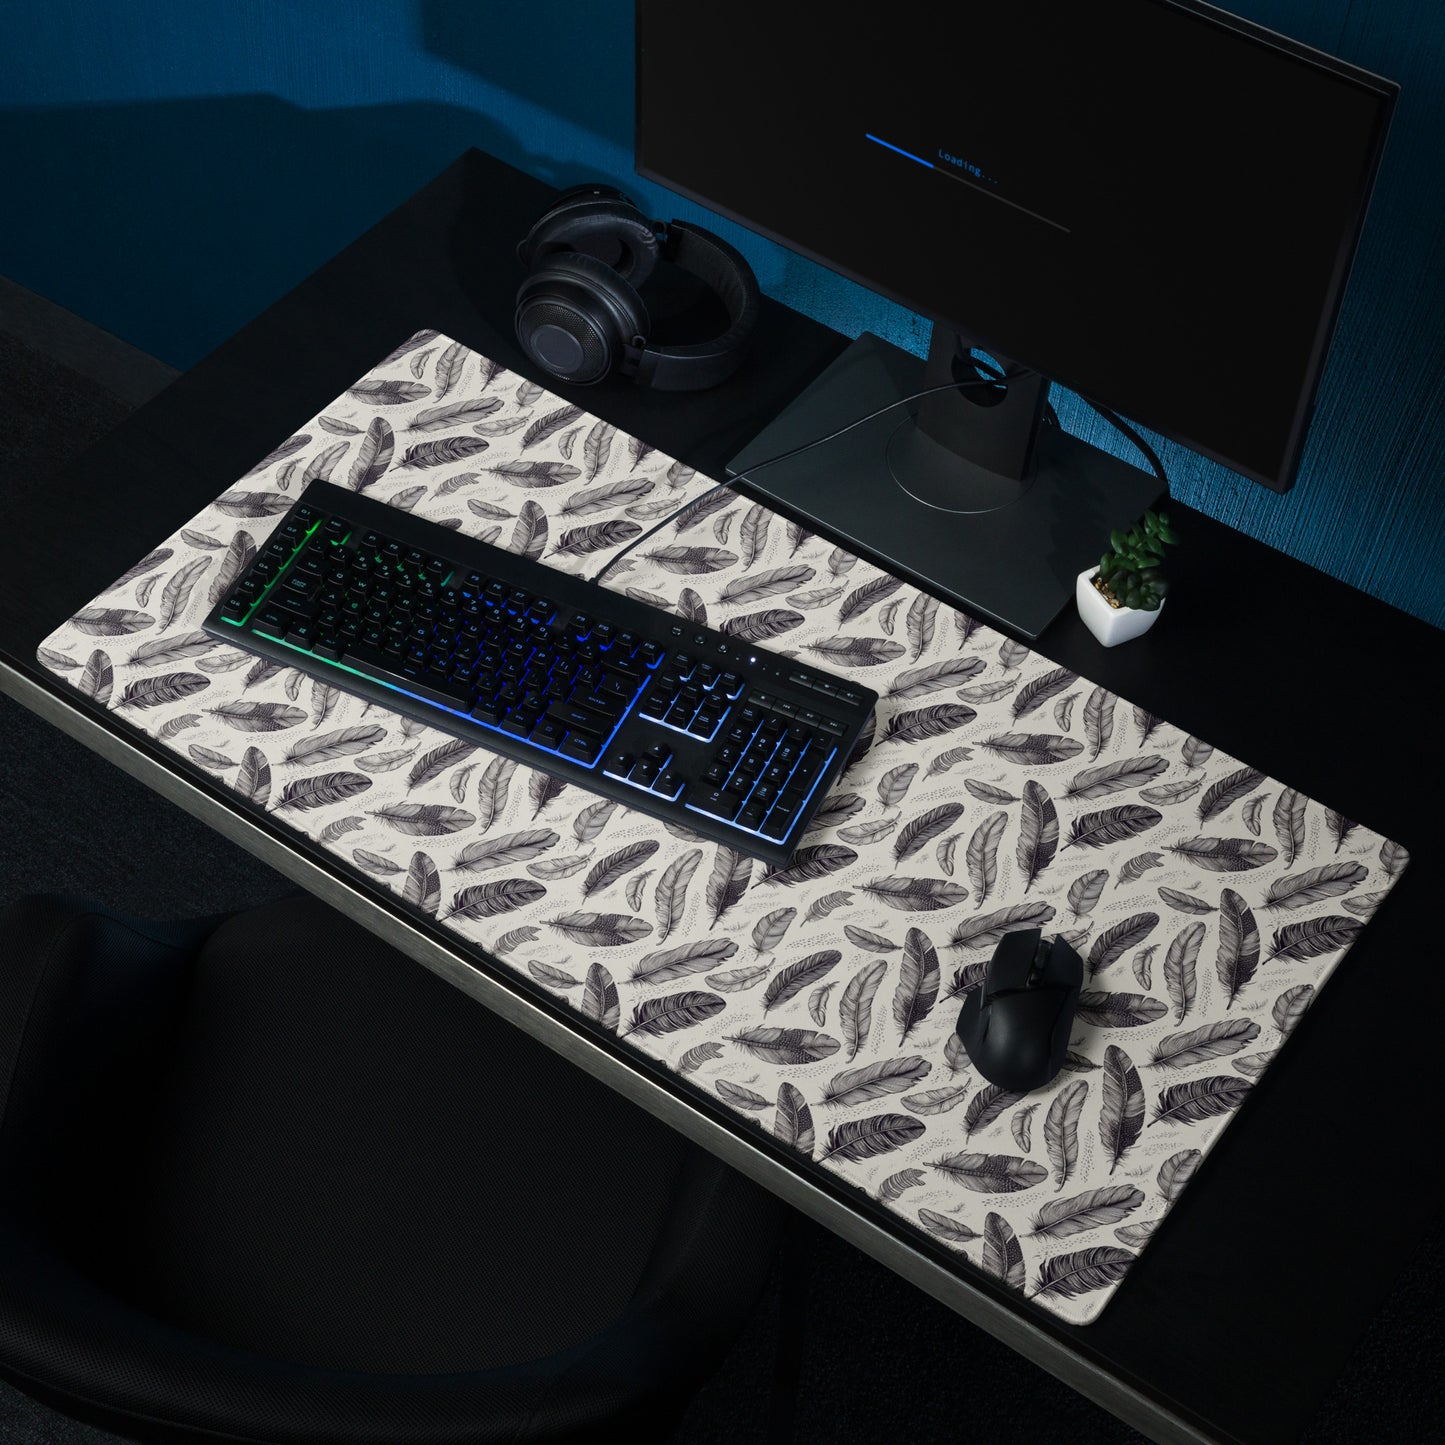 A 36" x 18" gaming desk pad with black and white feathers. It sits on a black desk with a keyboard, mouse, and monitor.